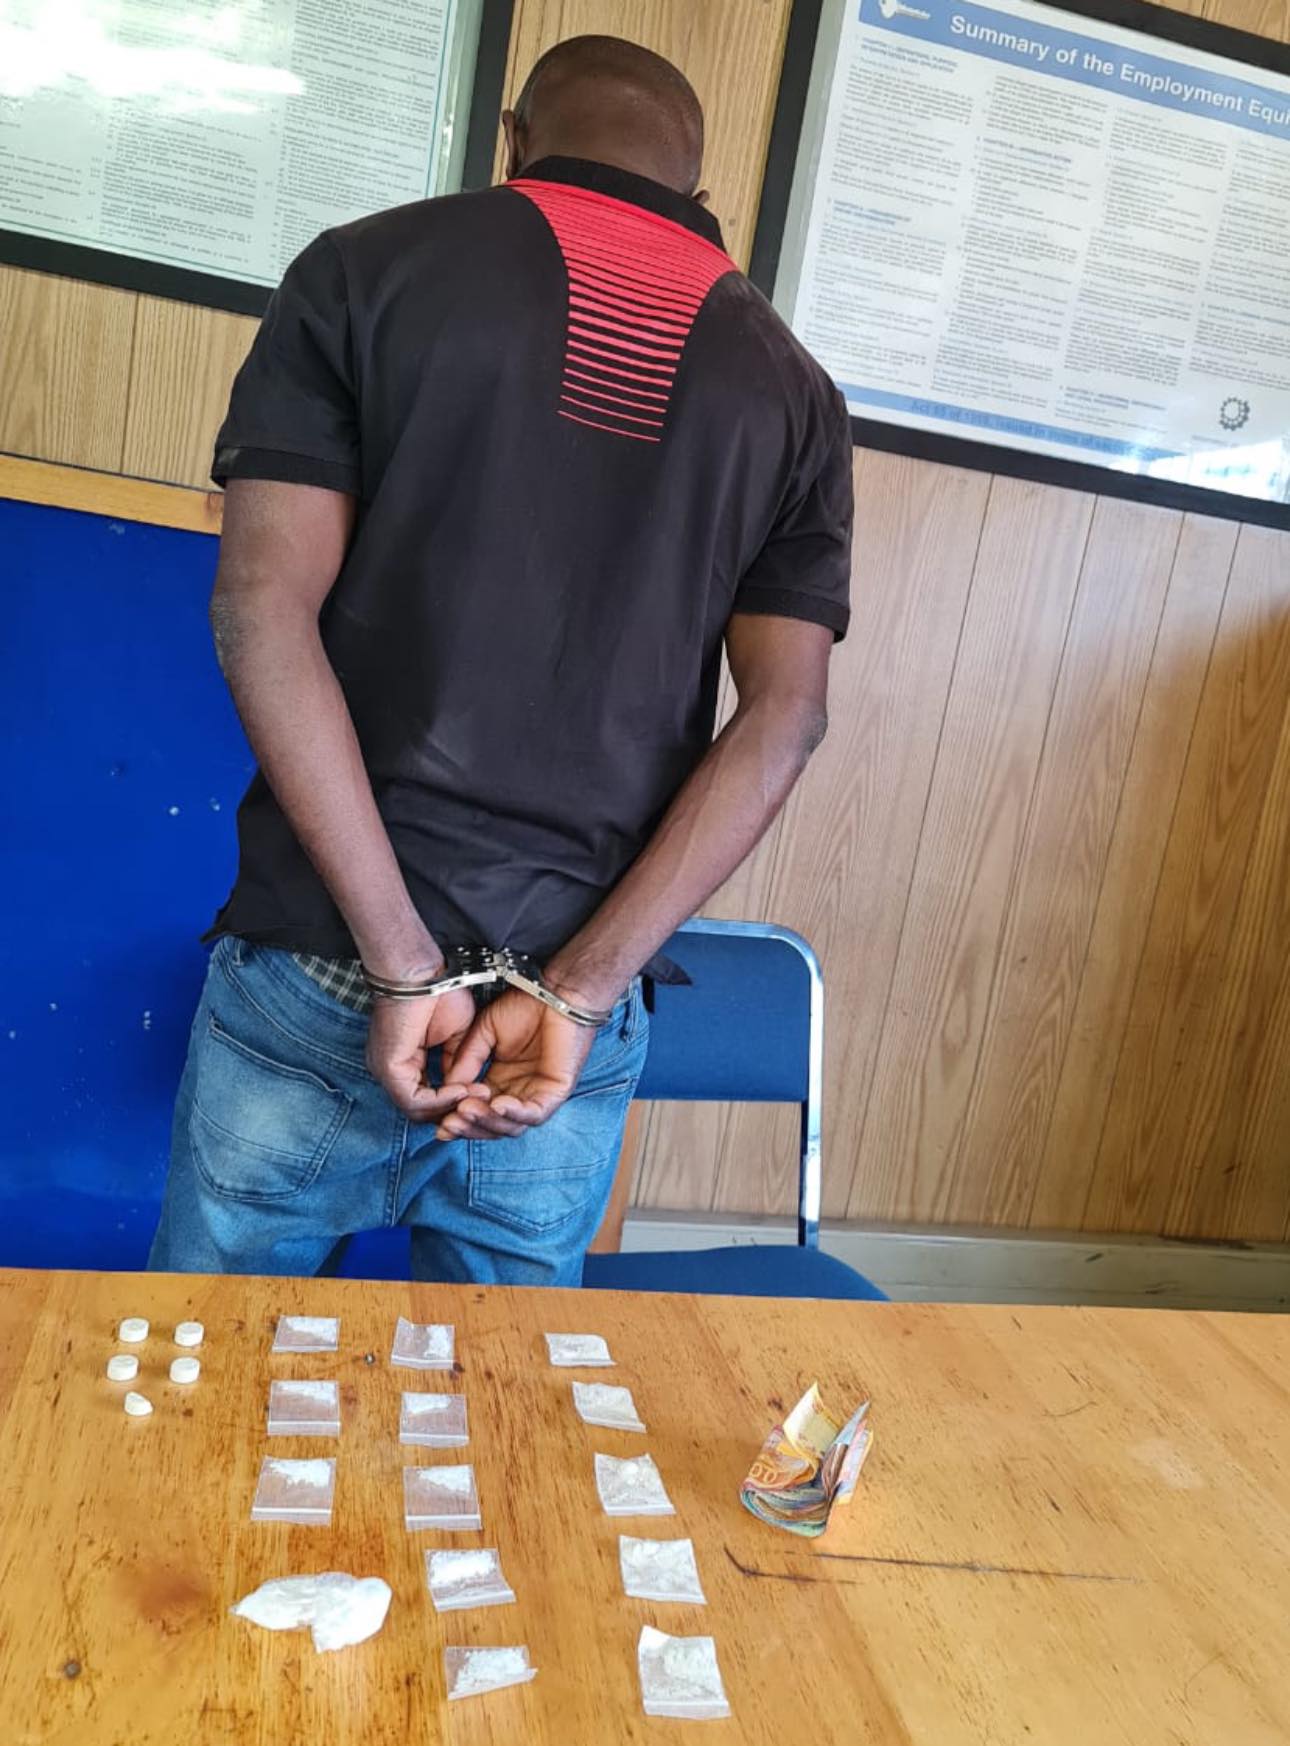 A suspect was apprehended and narcotics confiscated in the Boksburg area